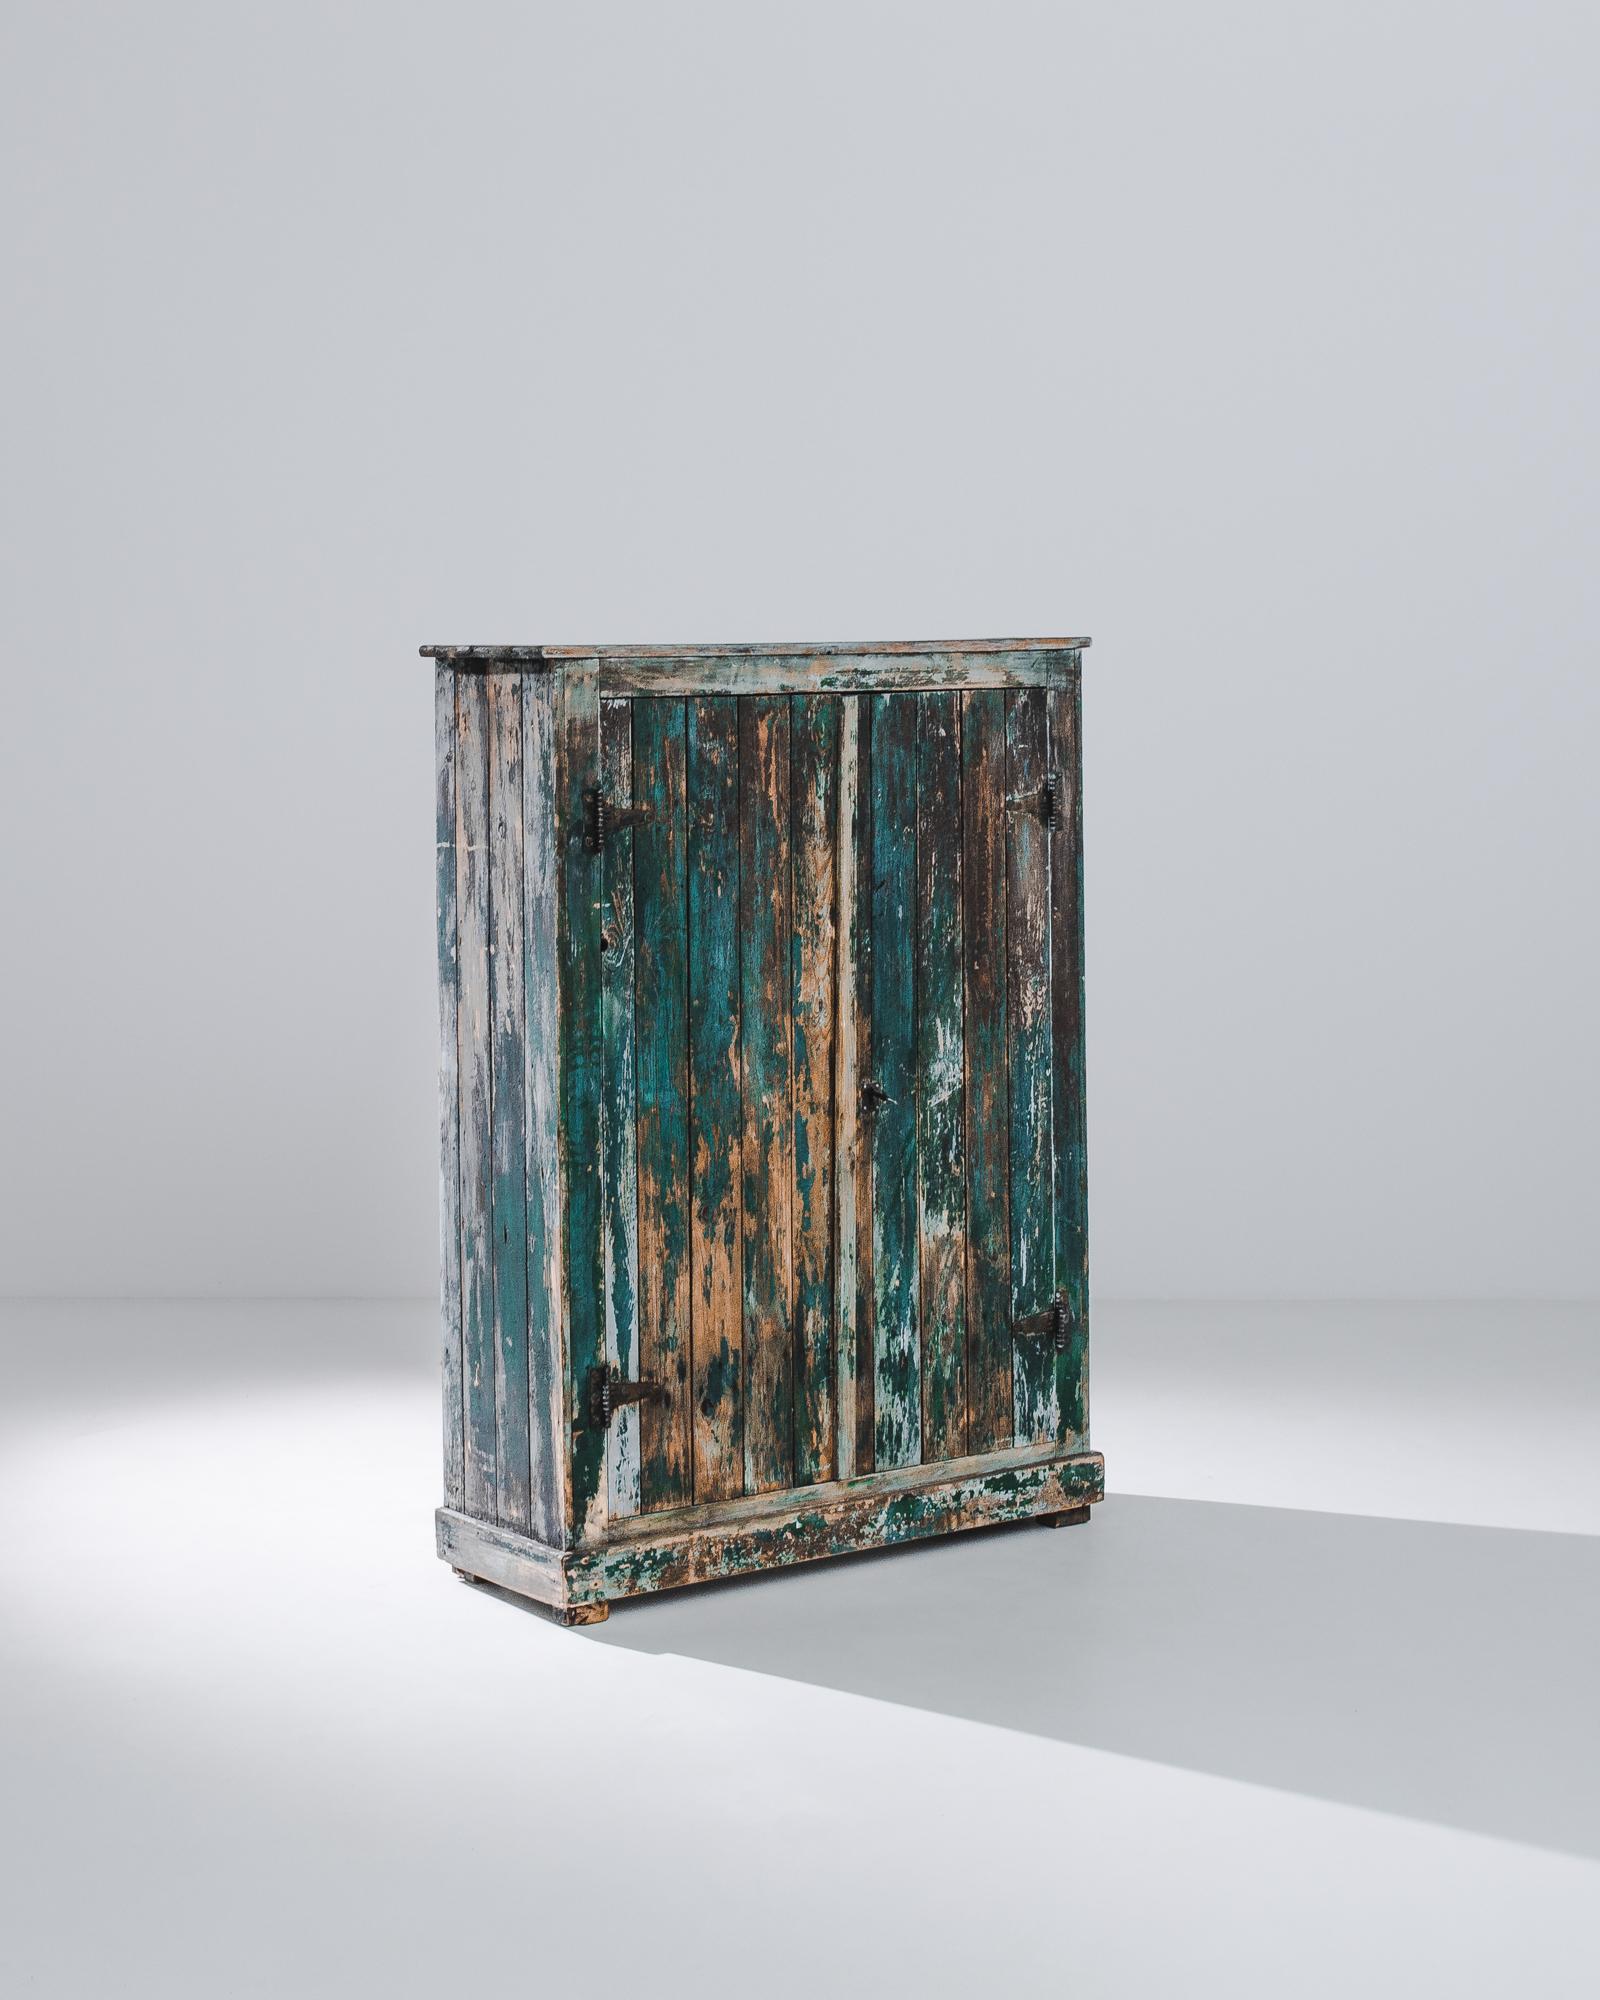 A wooden cabinet produced in France circa 1900. At nearly five feet tall, this wooden chest with layers of original patination. Streaks of blue and teal, evidence of a long life, of international intrigue. Deceptively simple, this ingeniously